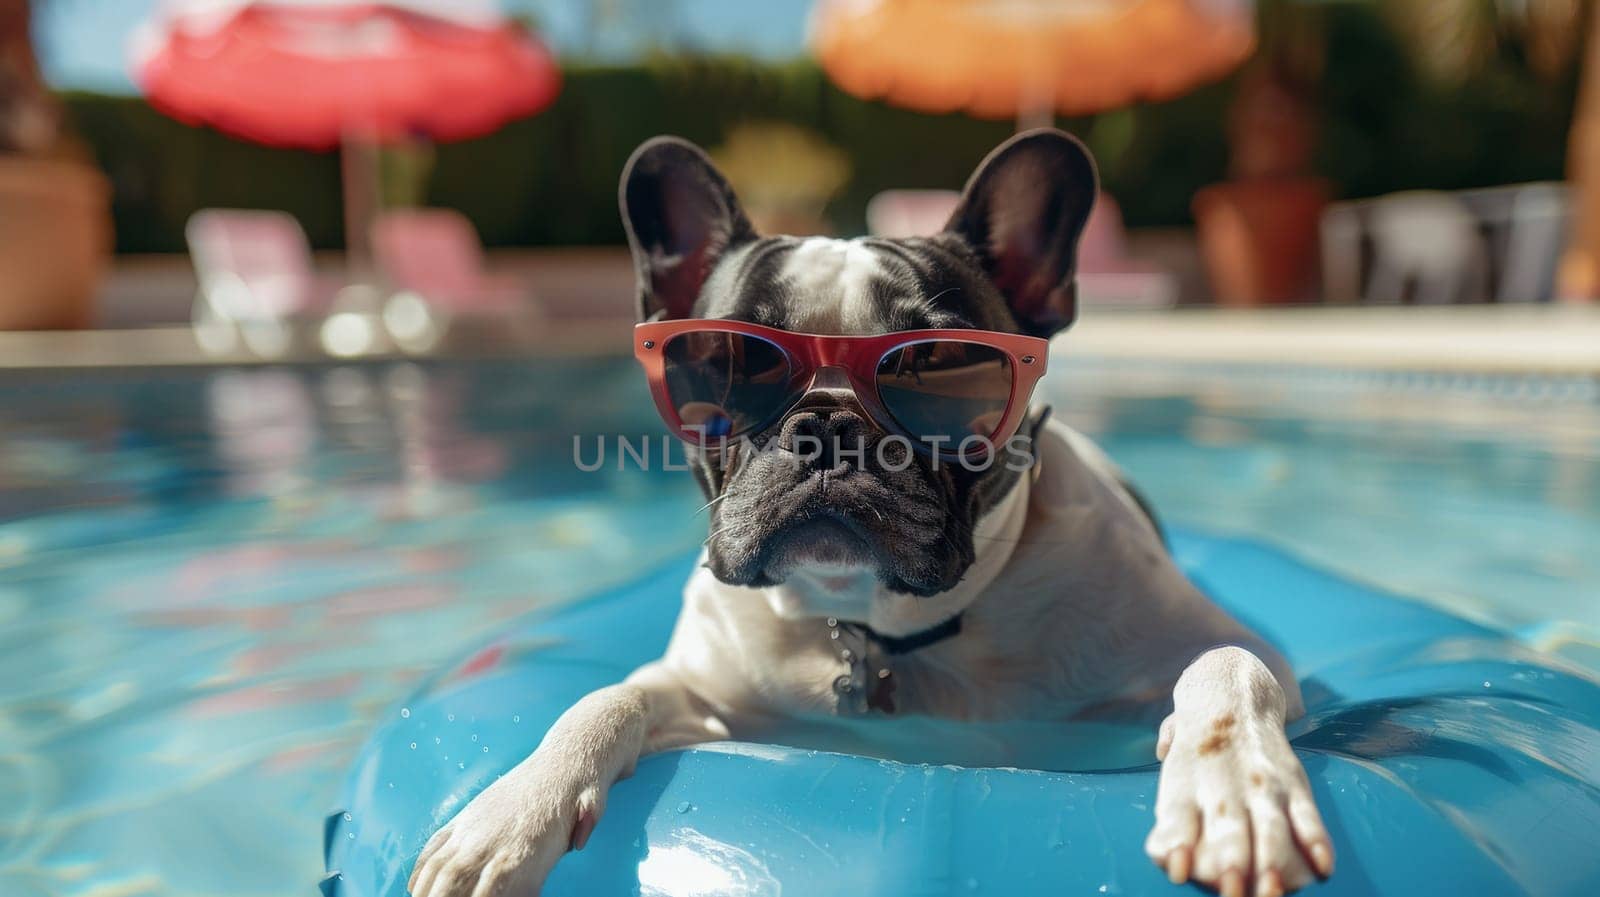 A dog wearing sunglasses and Floating in the Pool, summer season, summer background by nijieimu